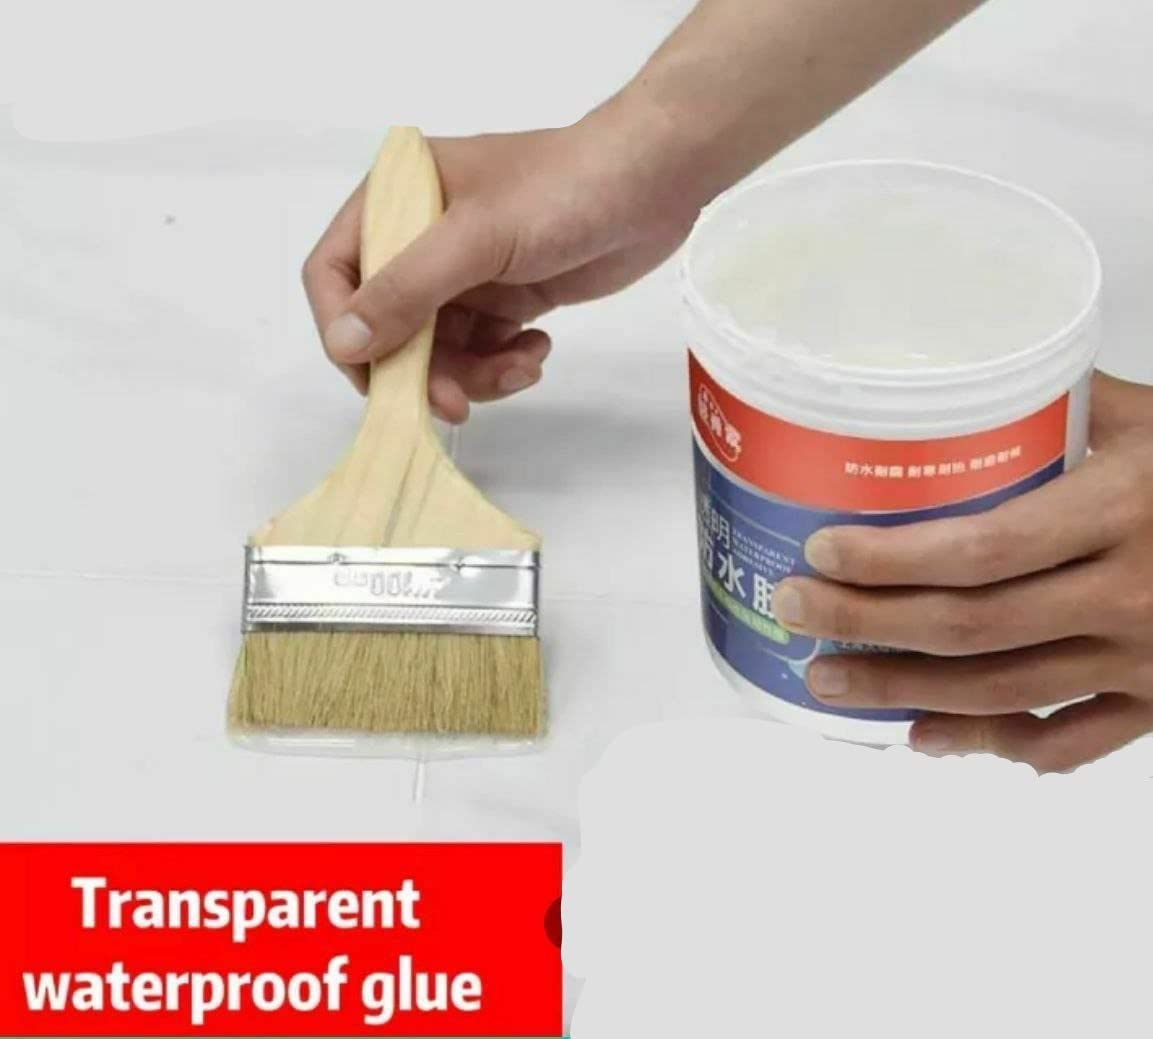 Waterproof Transparent Crack Seal Glue 300g with brush Leaking Sealant Window Crack Transparent Sealant Roof Sealant Waterproof Gel Adhesive seal cracks agent For Surface, Cement, Marble, Wood